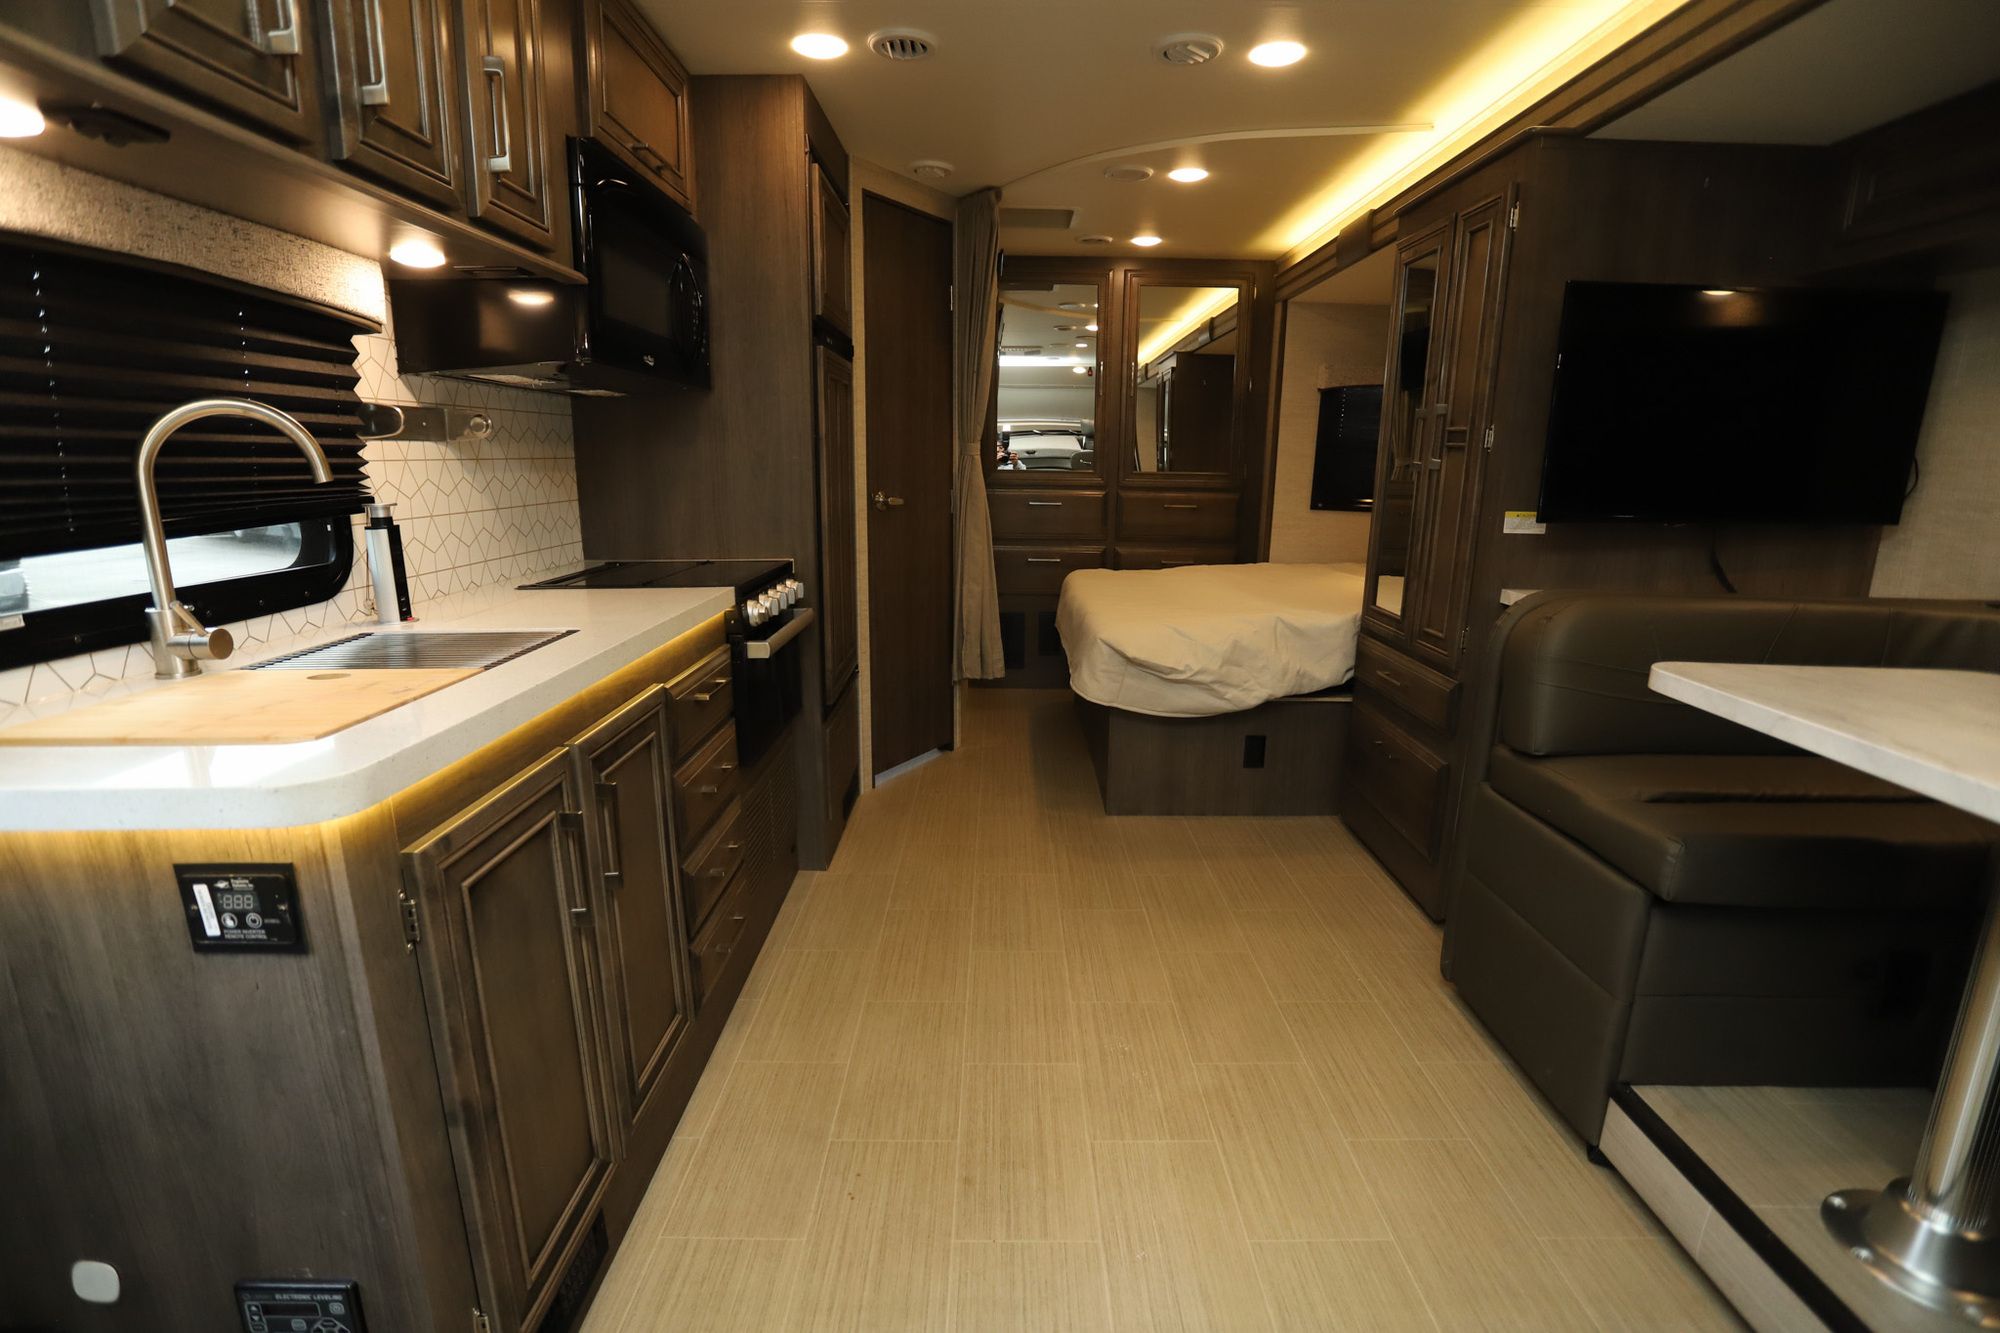 Used 2022 Entegra Odyssey 24B Class C  For Sale